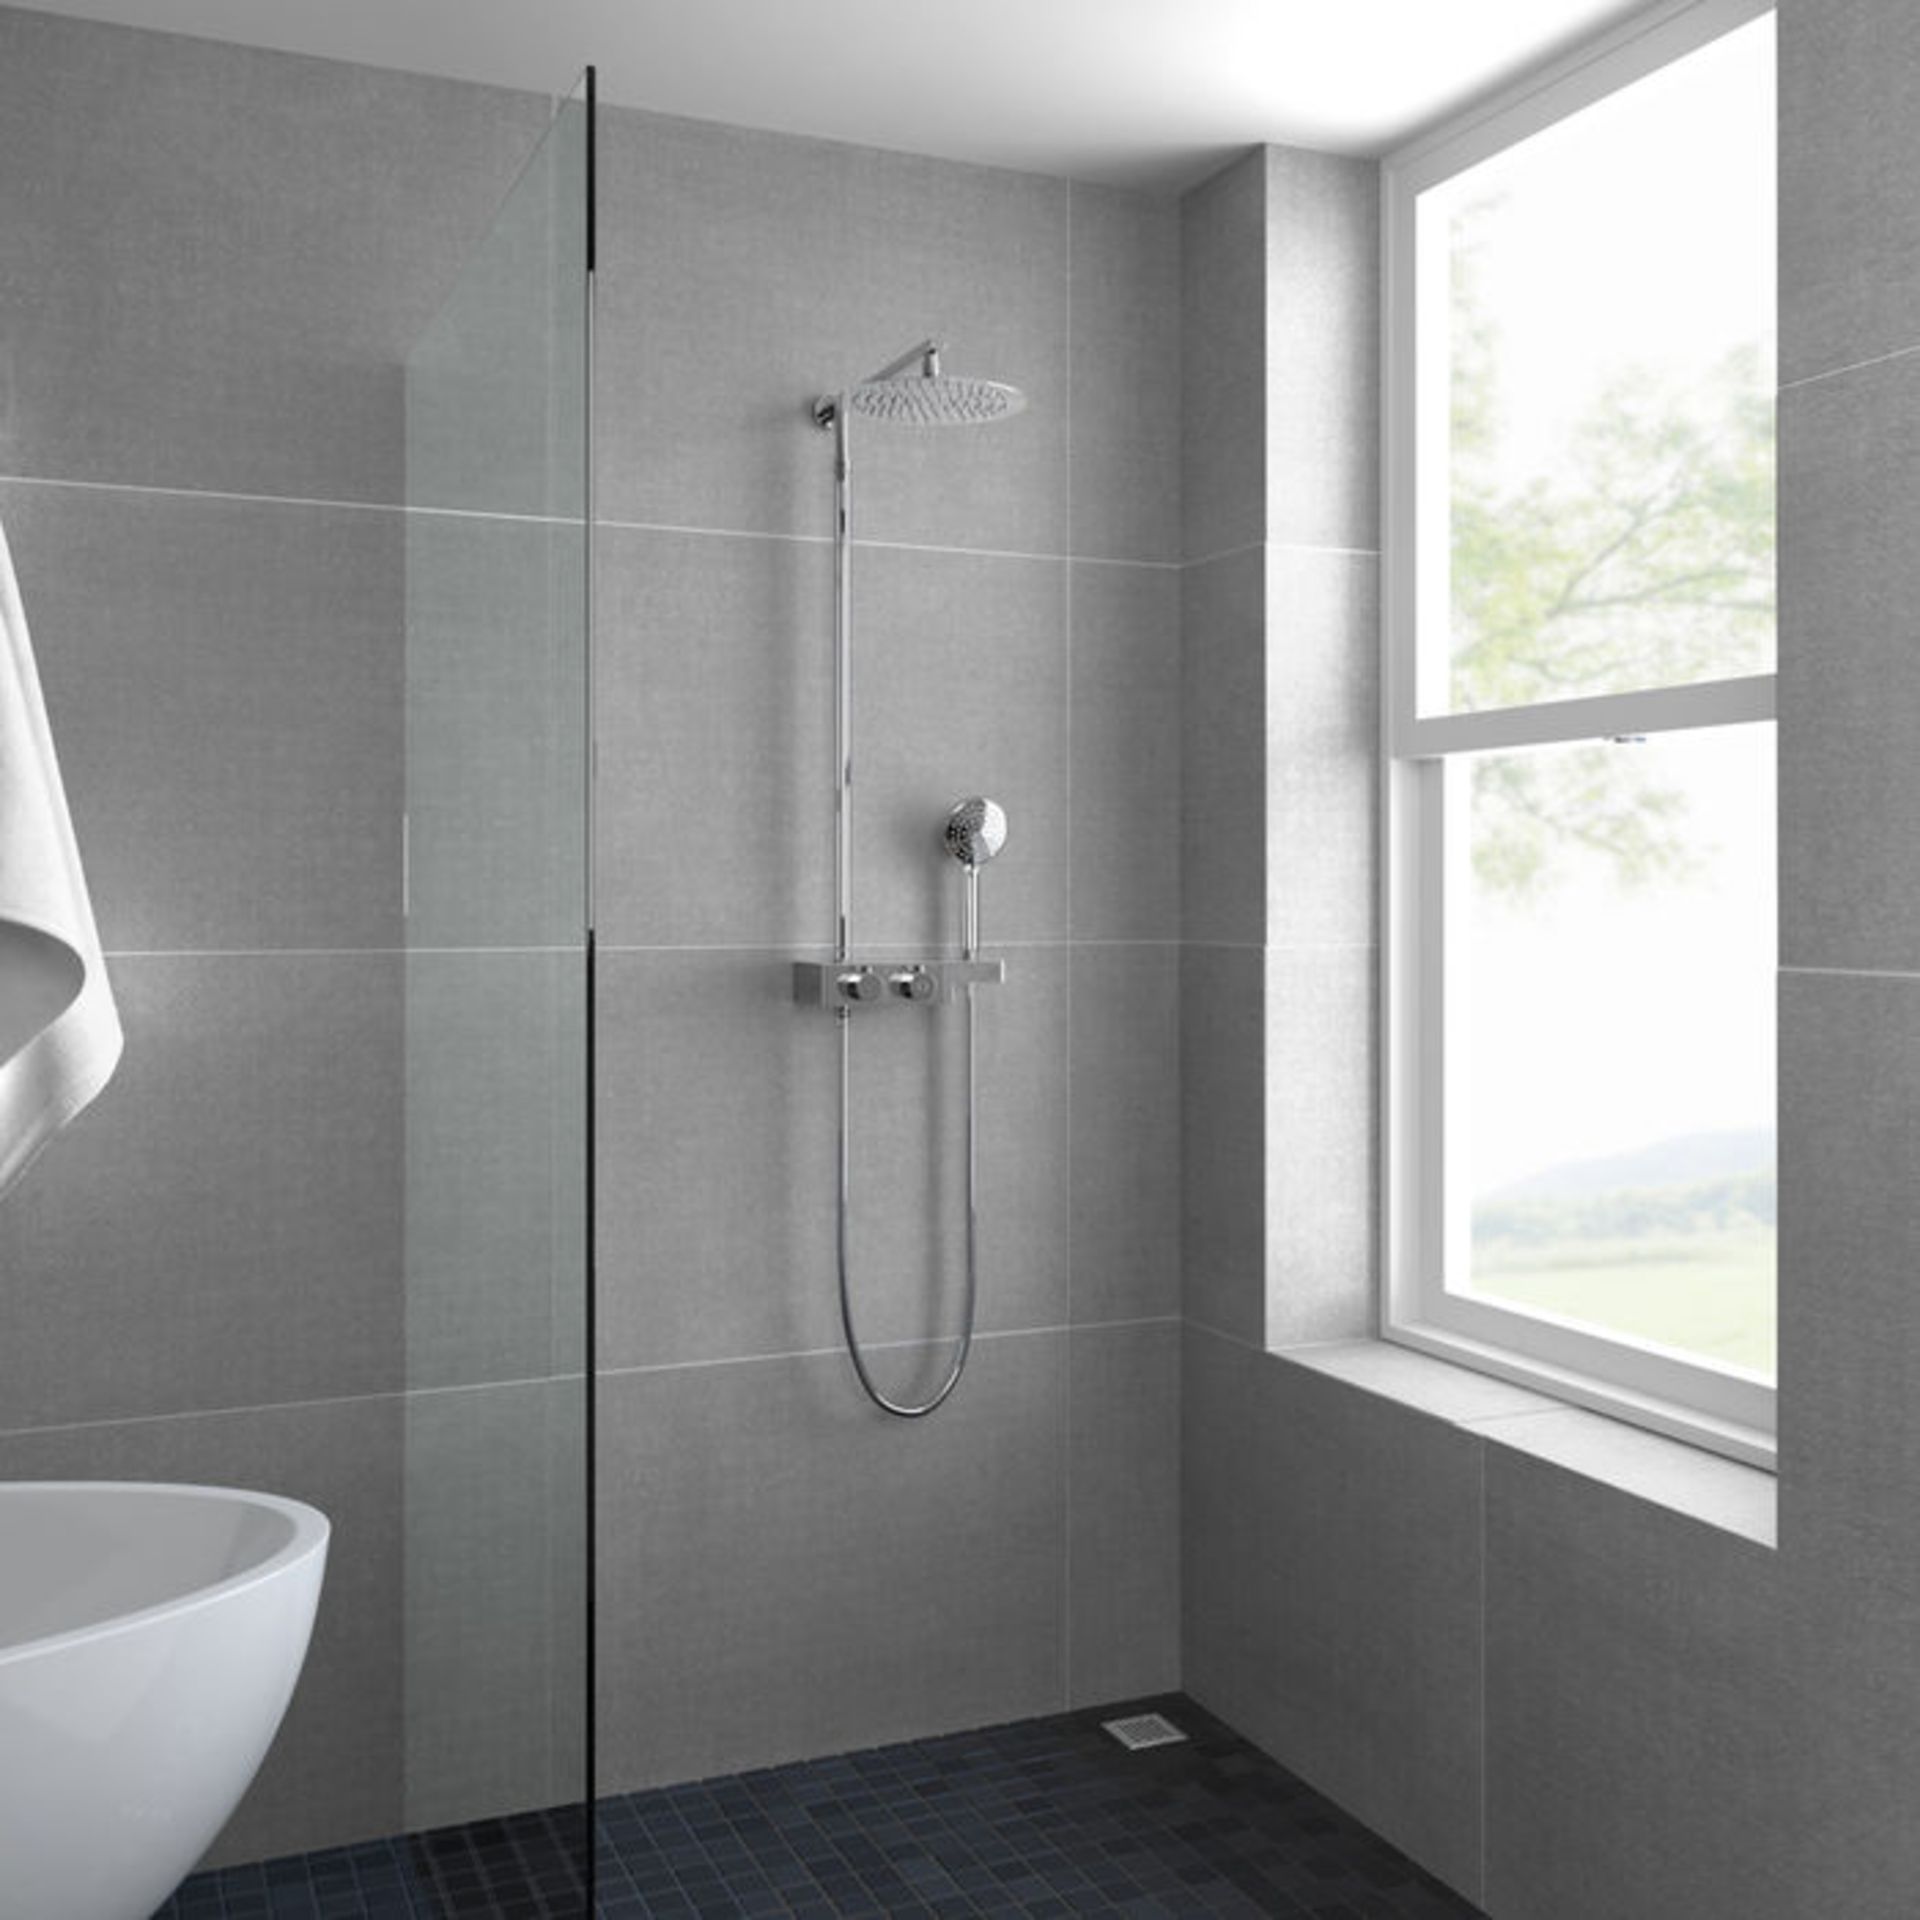 (KL36) Round Exposed Thermostatic Mixer Shower Kit & Large Head. Cool to touch shower for additional - Image 4 of 4